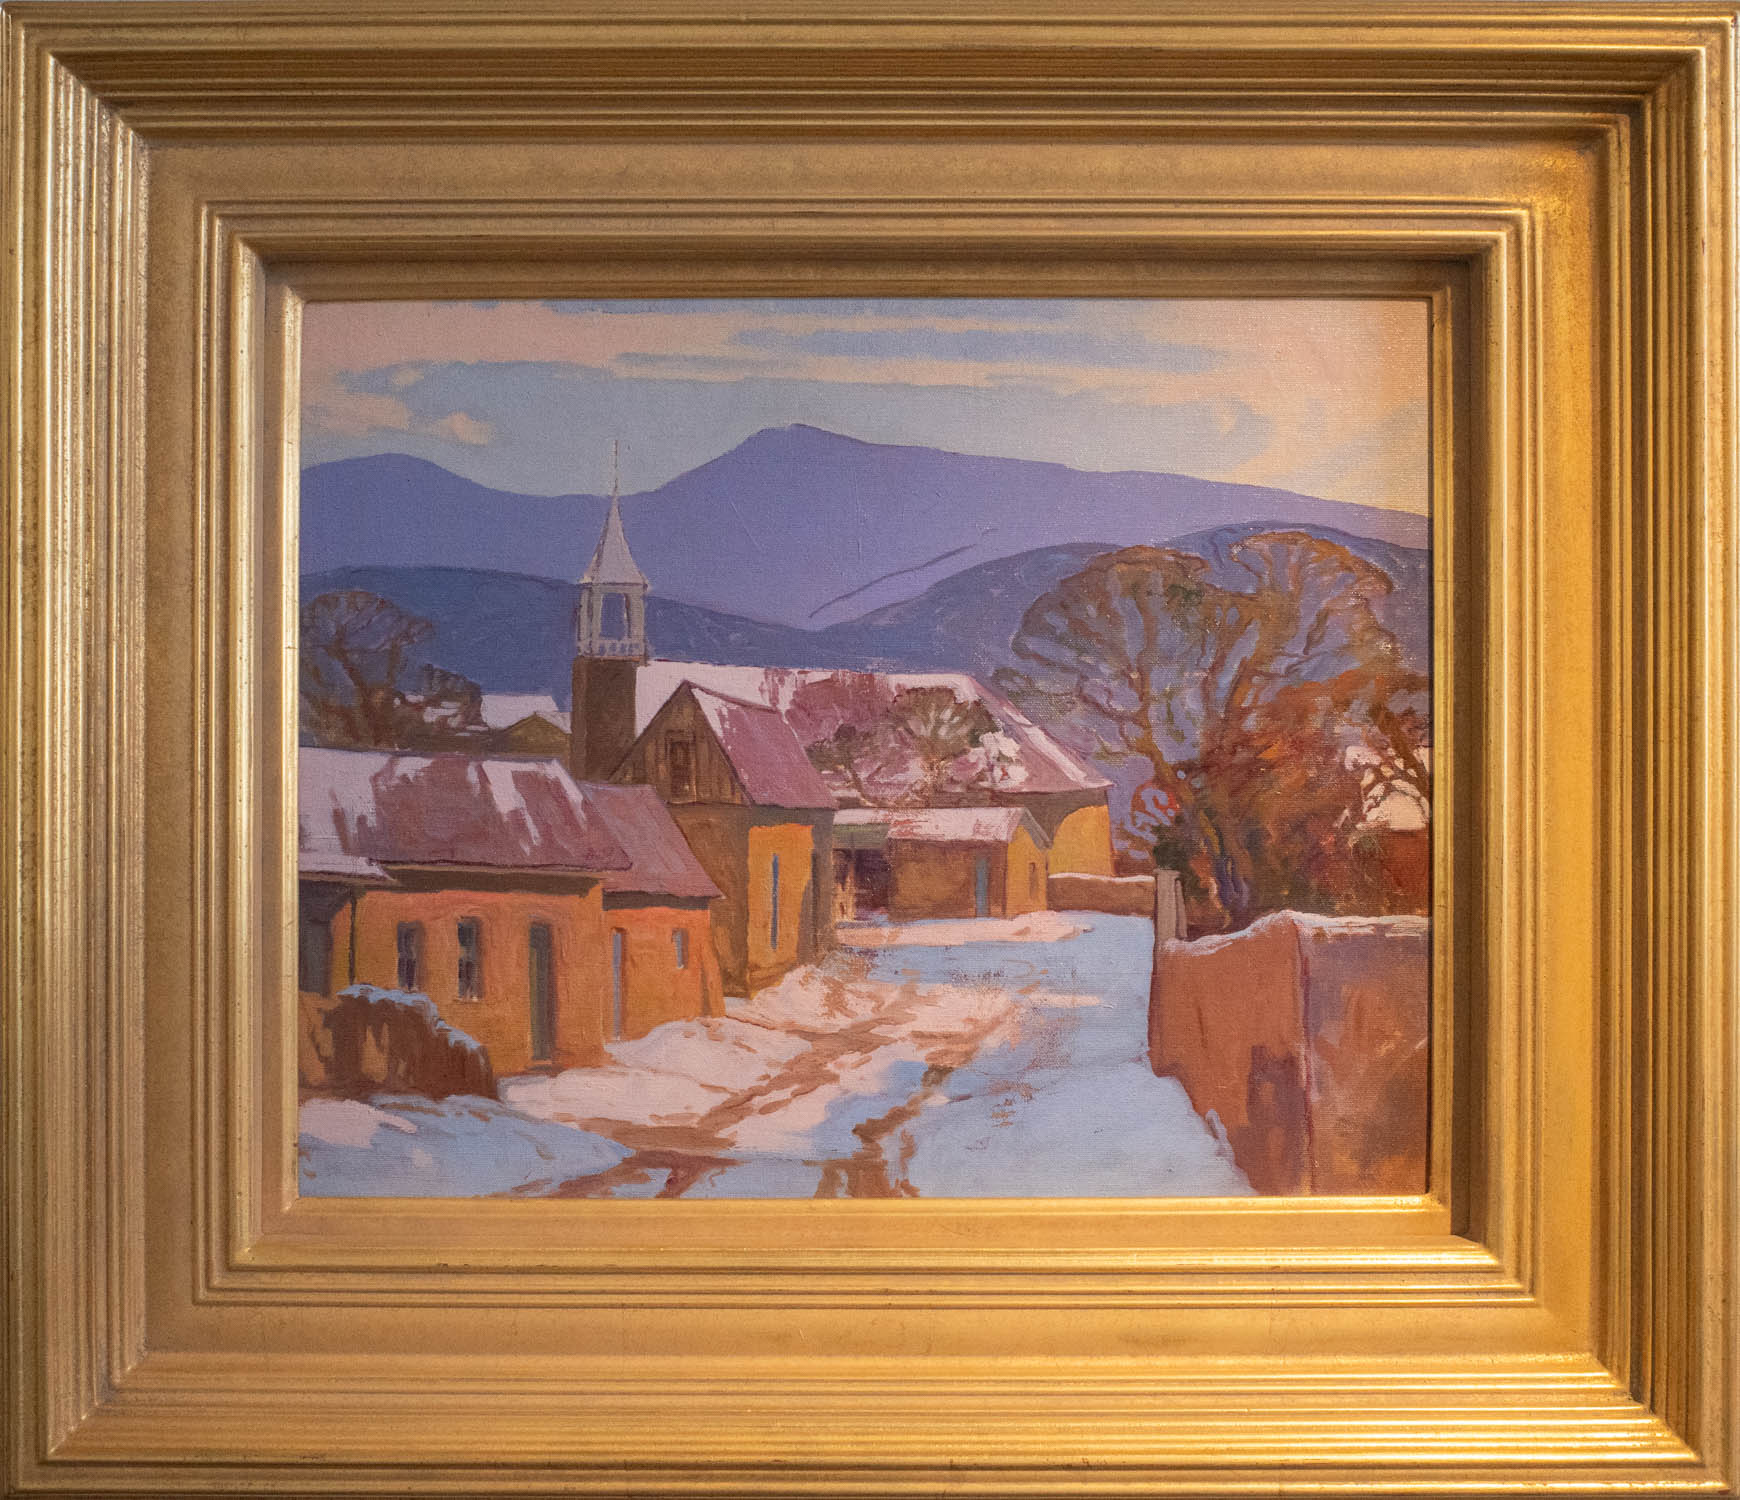 An impressionistic oil painting of a snowy village with a prominent church steeple, surrounded by snow-covered buildings against a backdrop of mountains under a purple and blue sky, presented in a detailed gold frame. Title: Pecos, New Mexico.